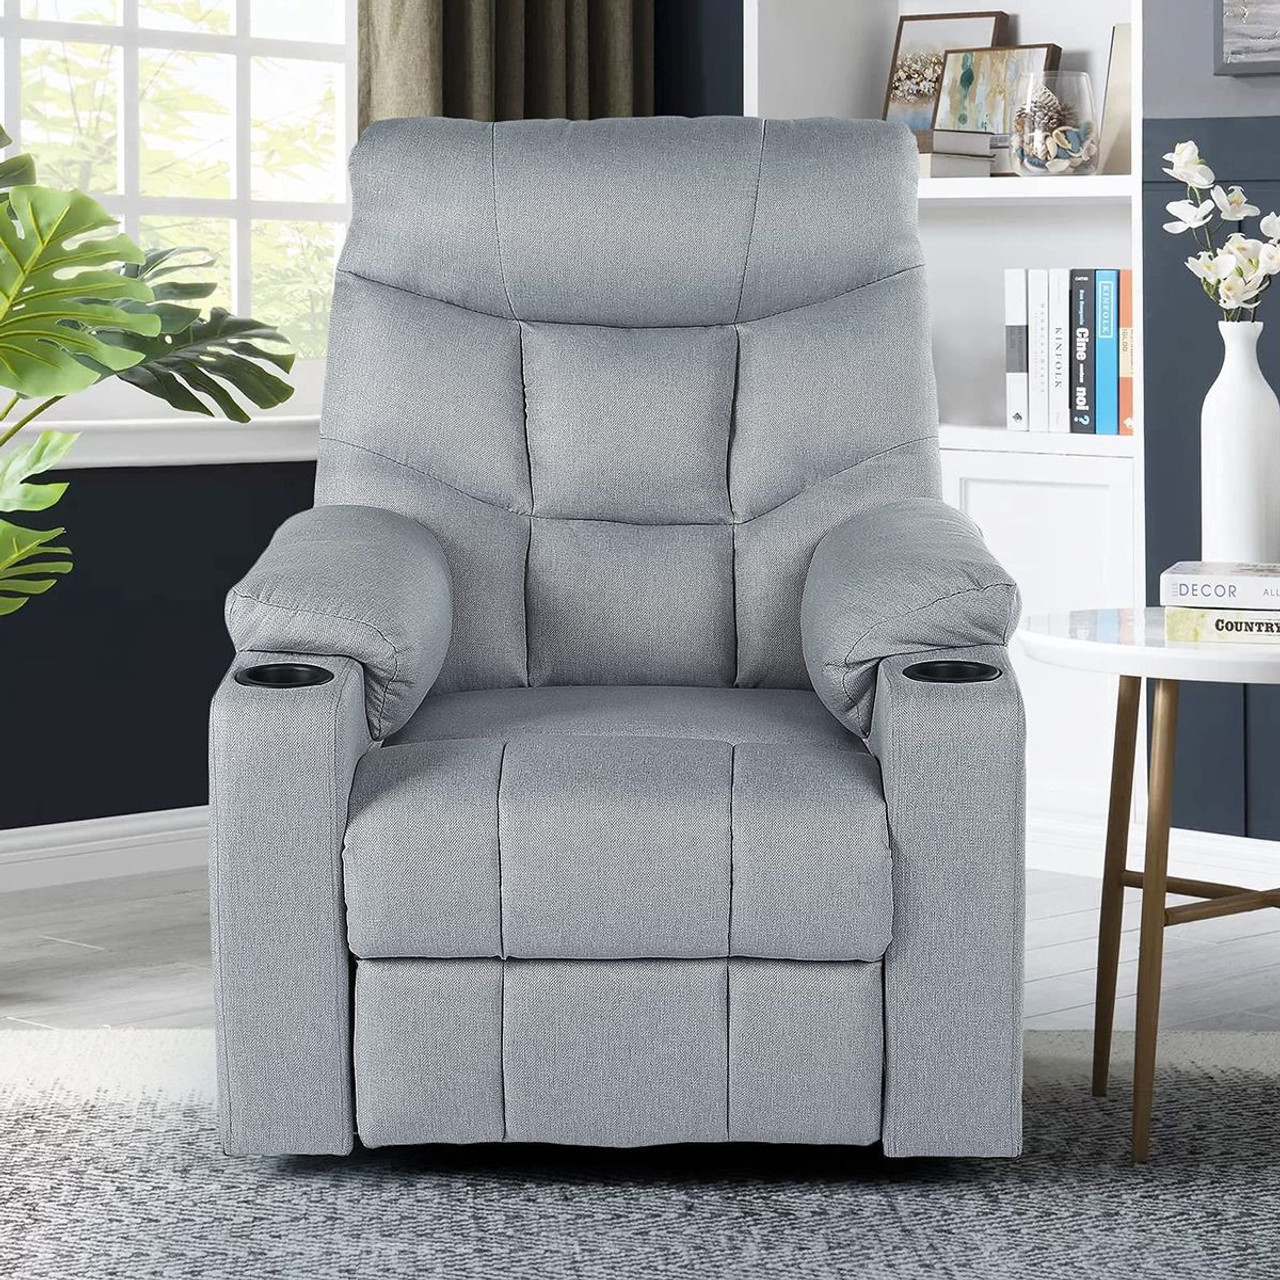 Electric Power Lift Recliner Chair with Heat & Massage Functions product image